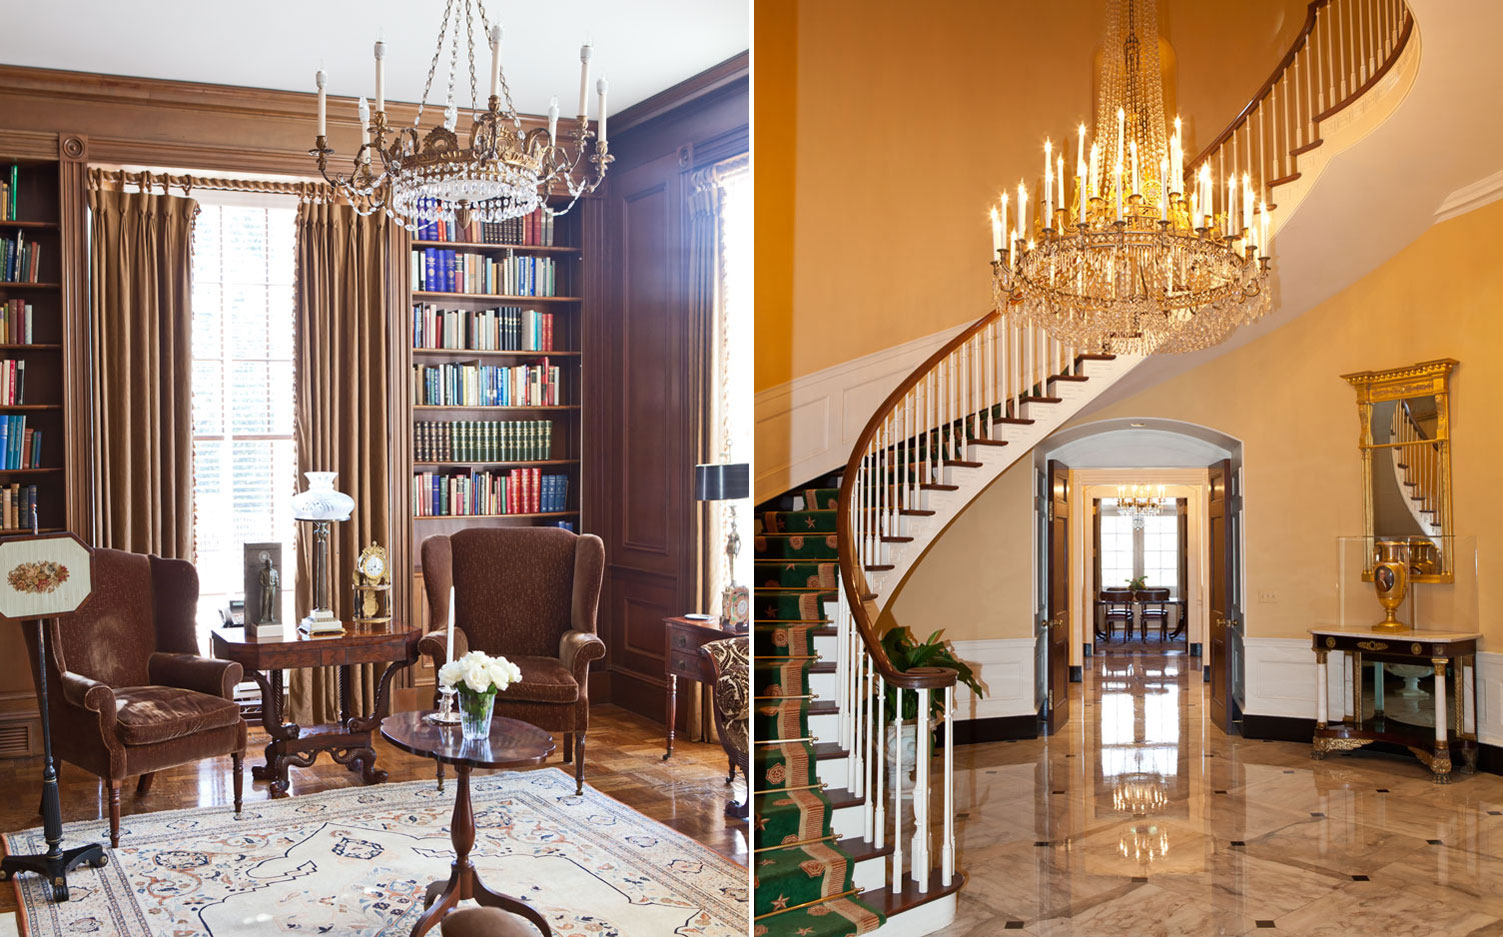 Photos of the inside of the Governor’s Mansion in Atlanta